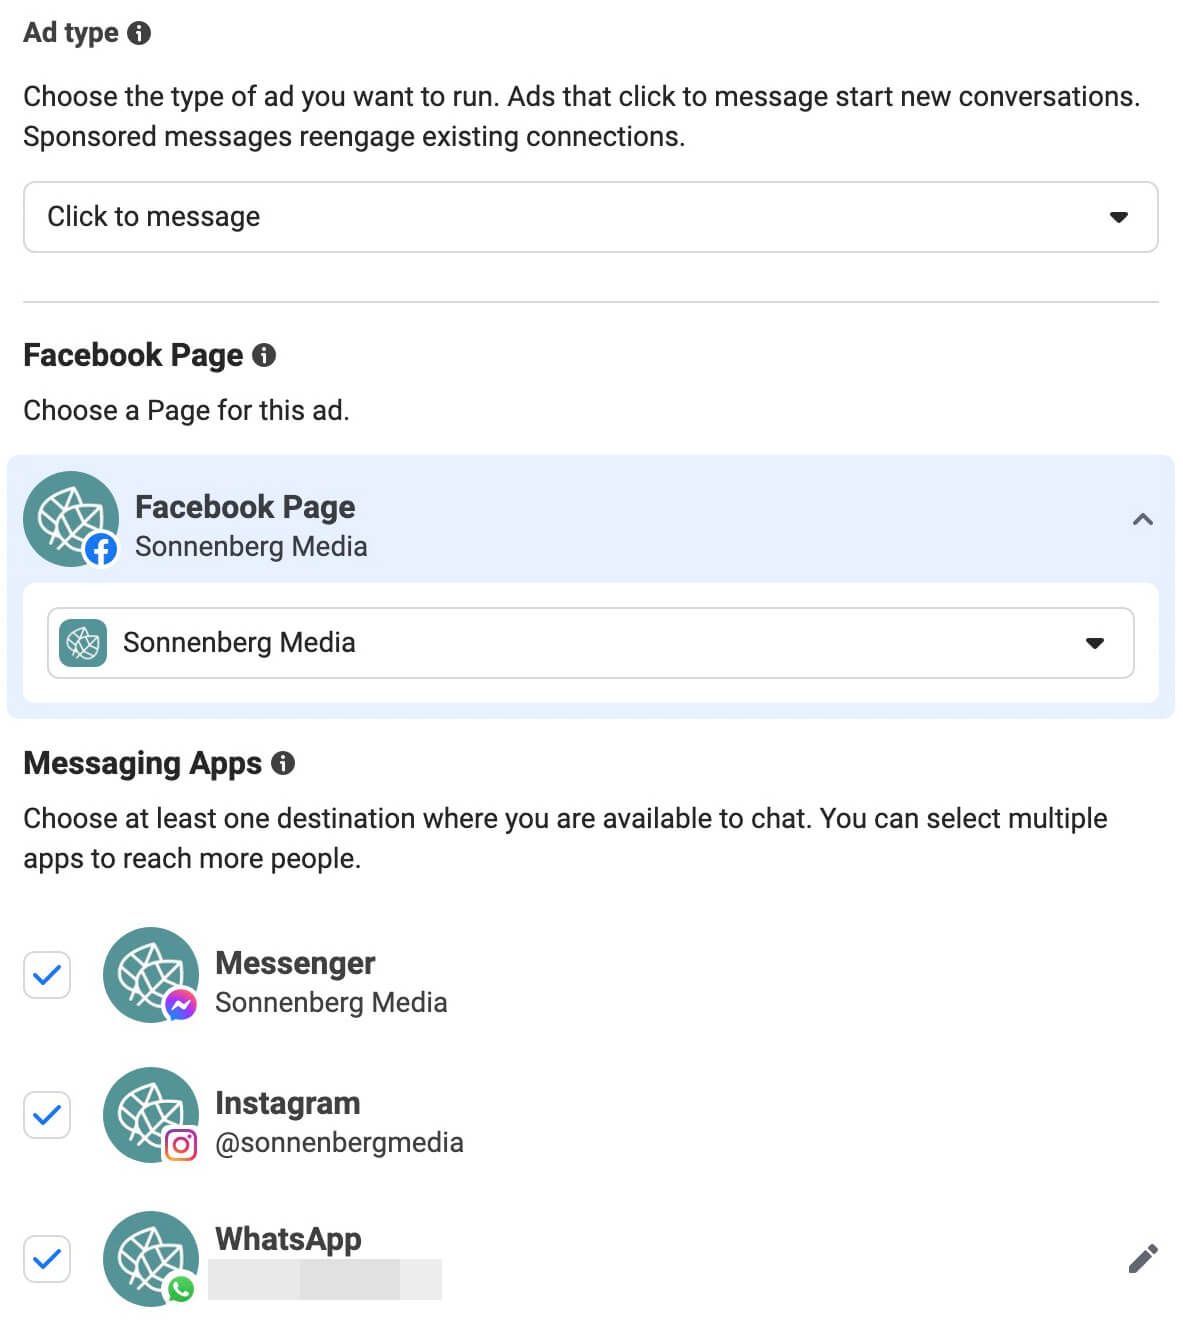 how-to-produce-engagement-ads-on-facebook-engagement-objective-messaging-apps-messenger-instagram-whatsapp-example-21